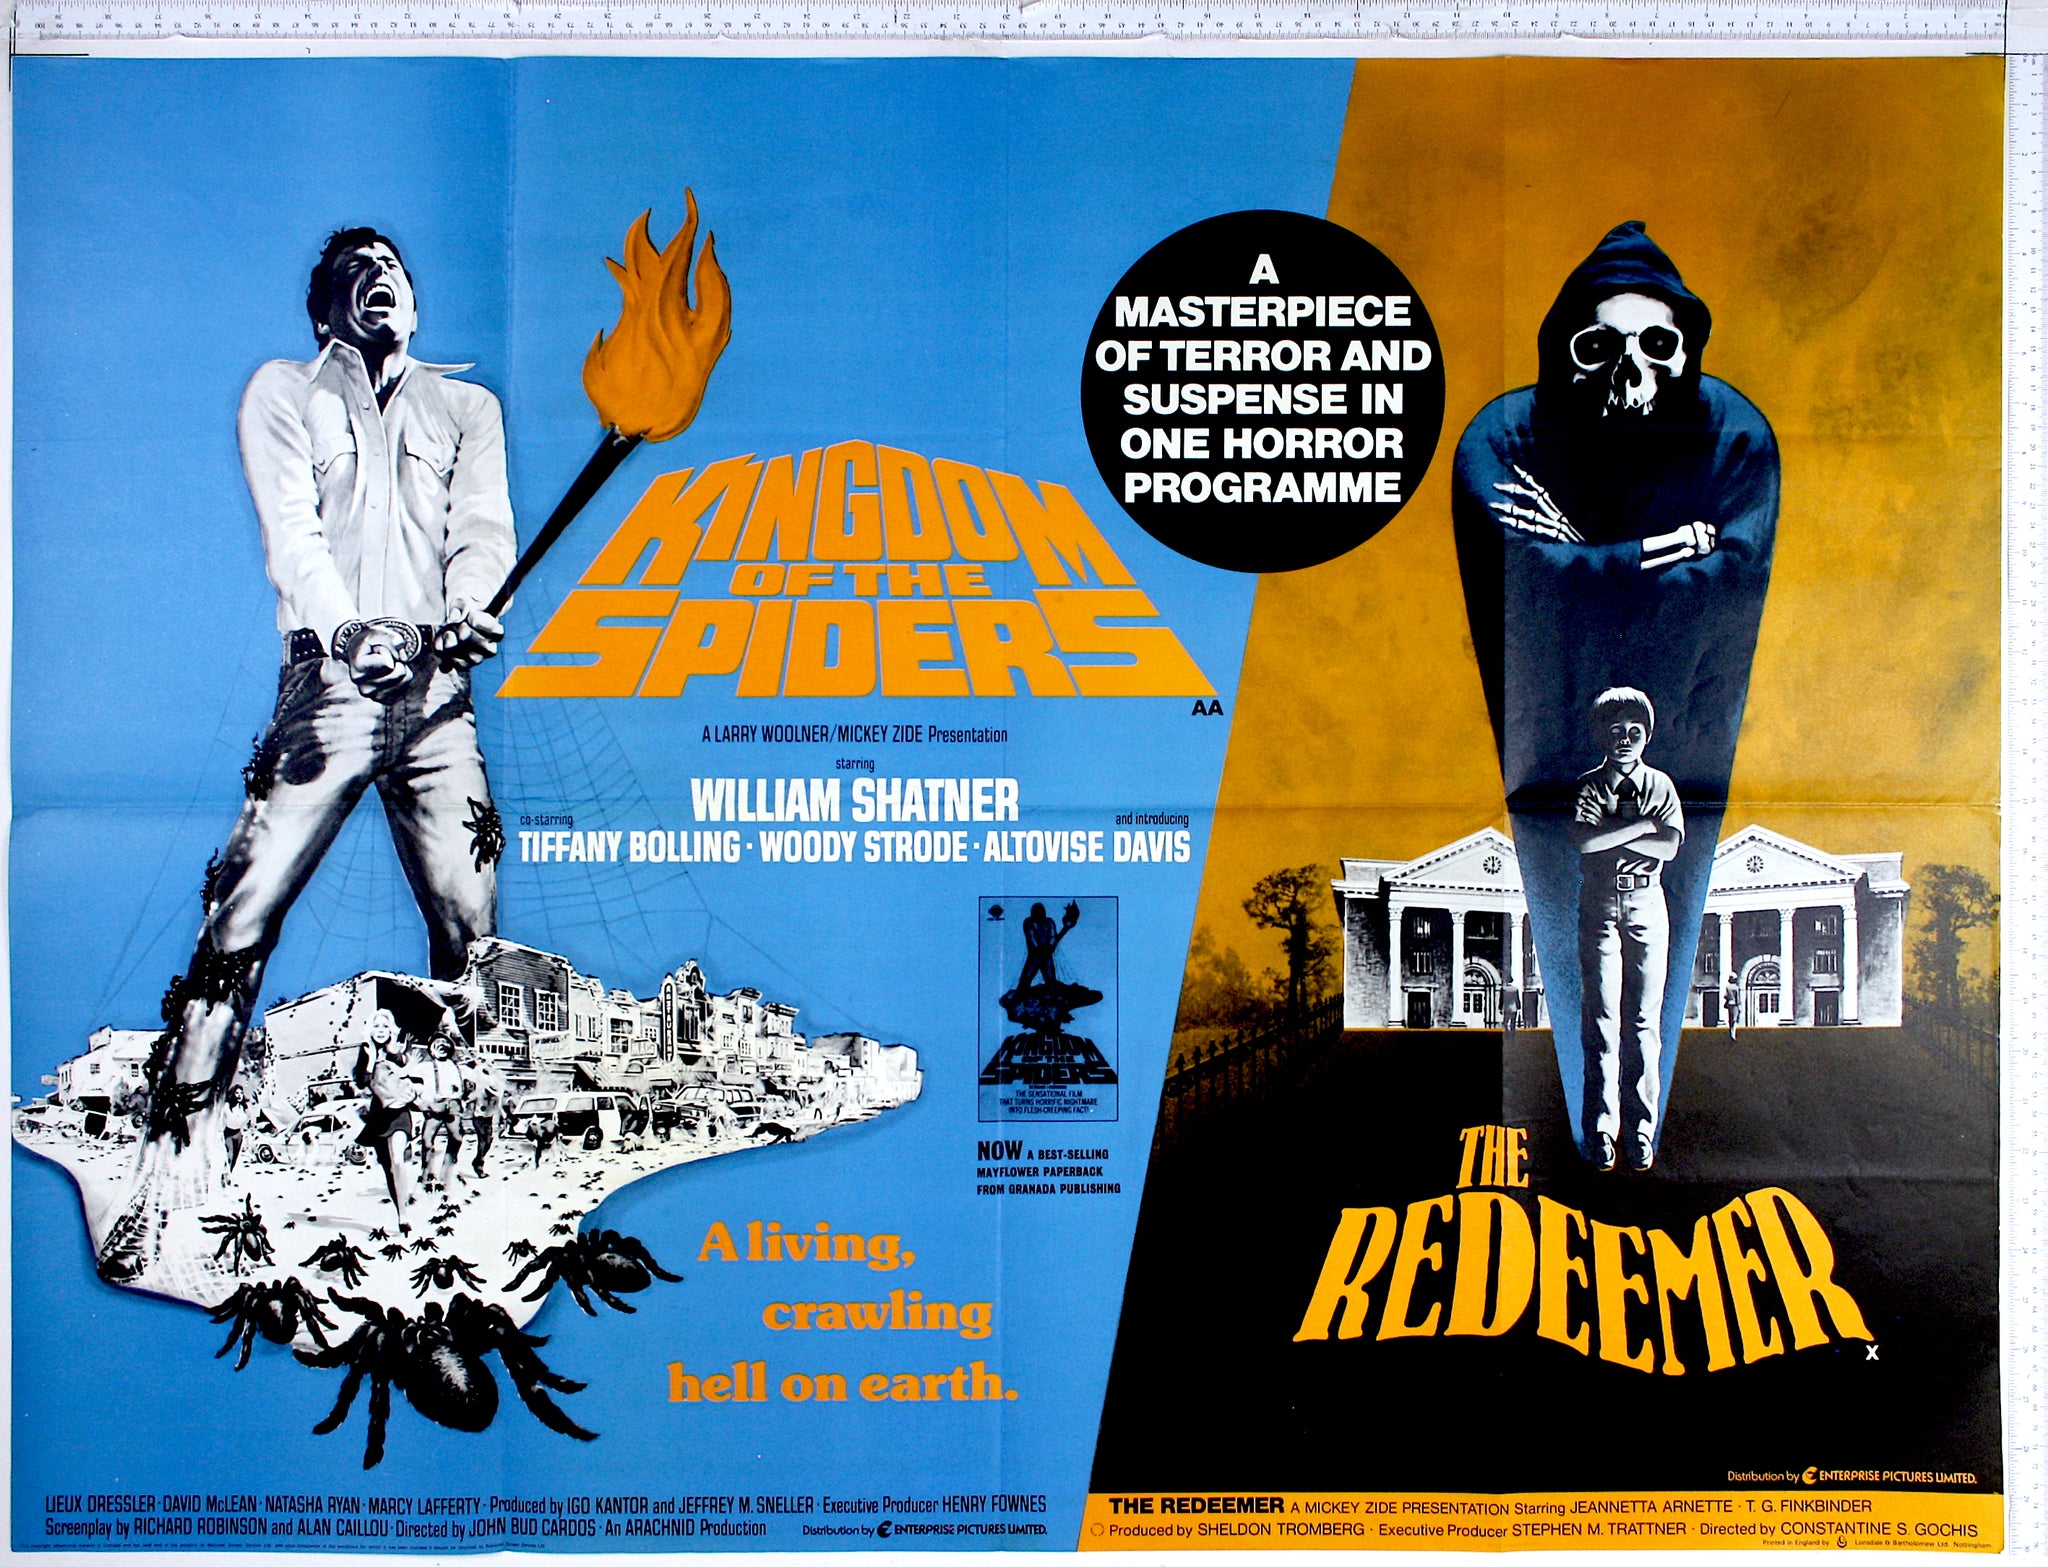 Kingdom of the Spiders / Redeemer (1977 / 1978) UK Quad Poster